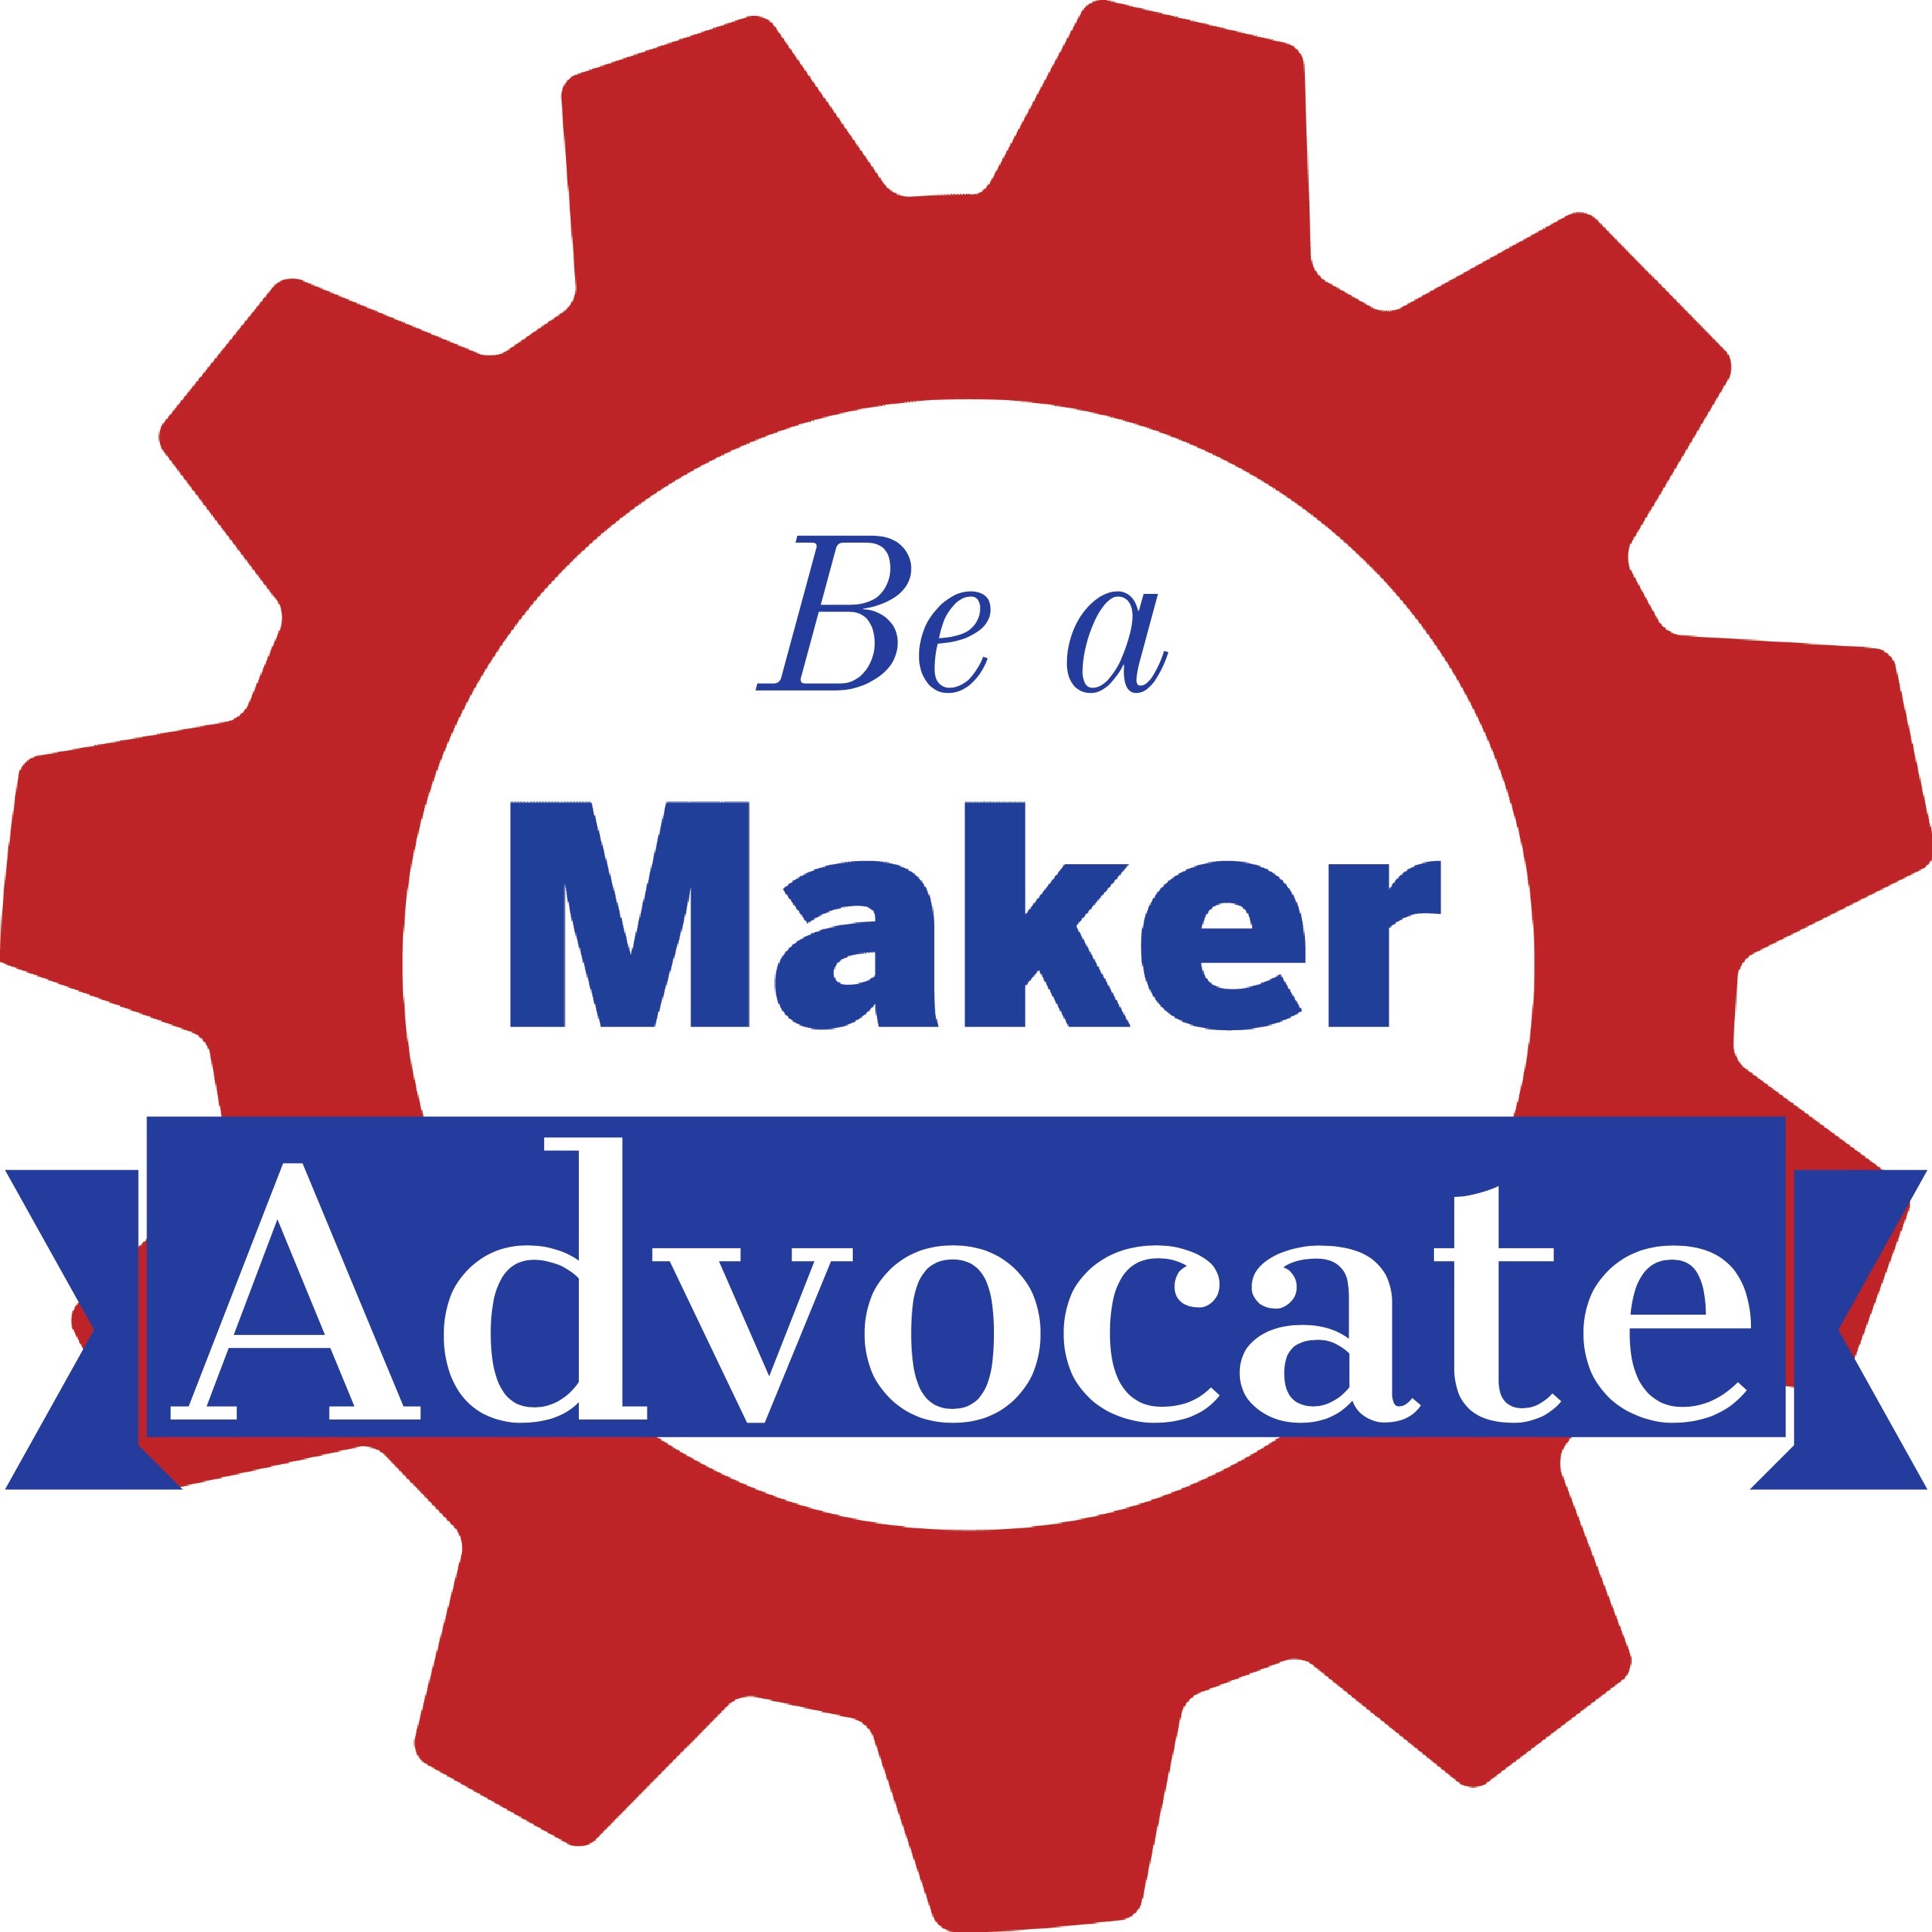 How to Advocate for Making